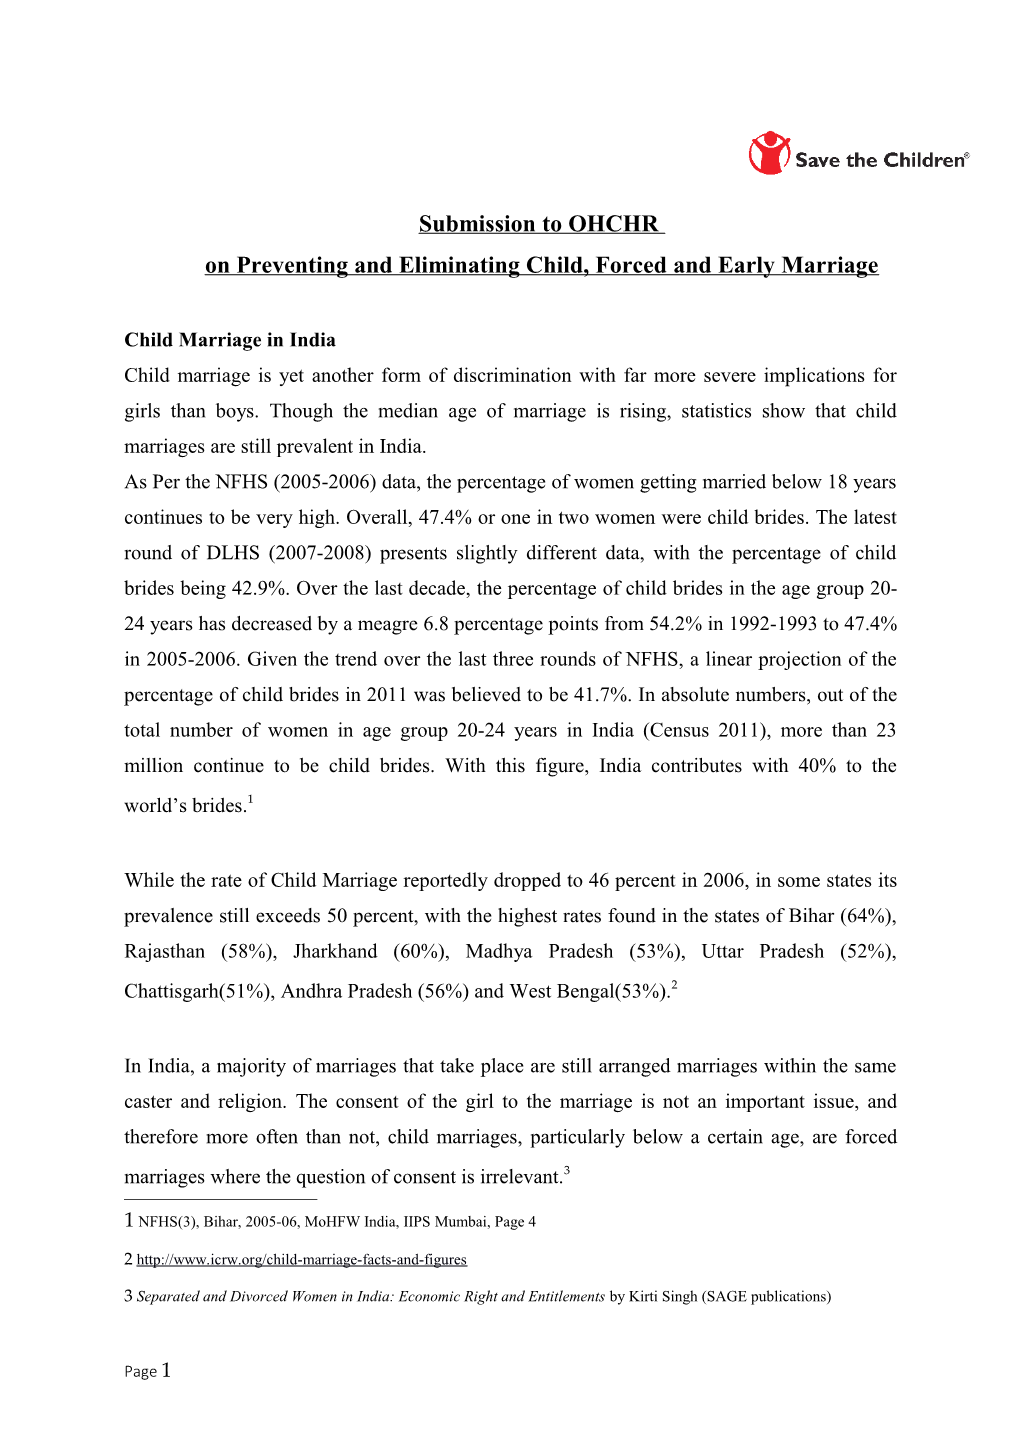 Submission to OHCHR on Preventing and Eliminating Child, Forced and Early Marriage